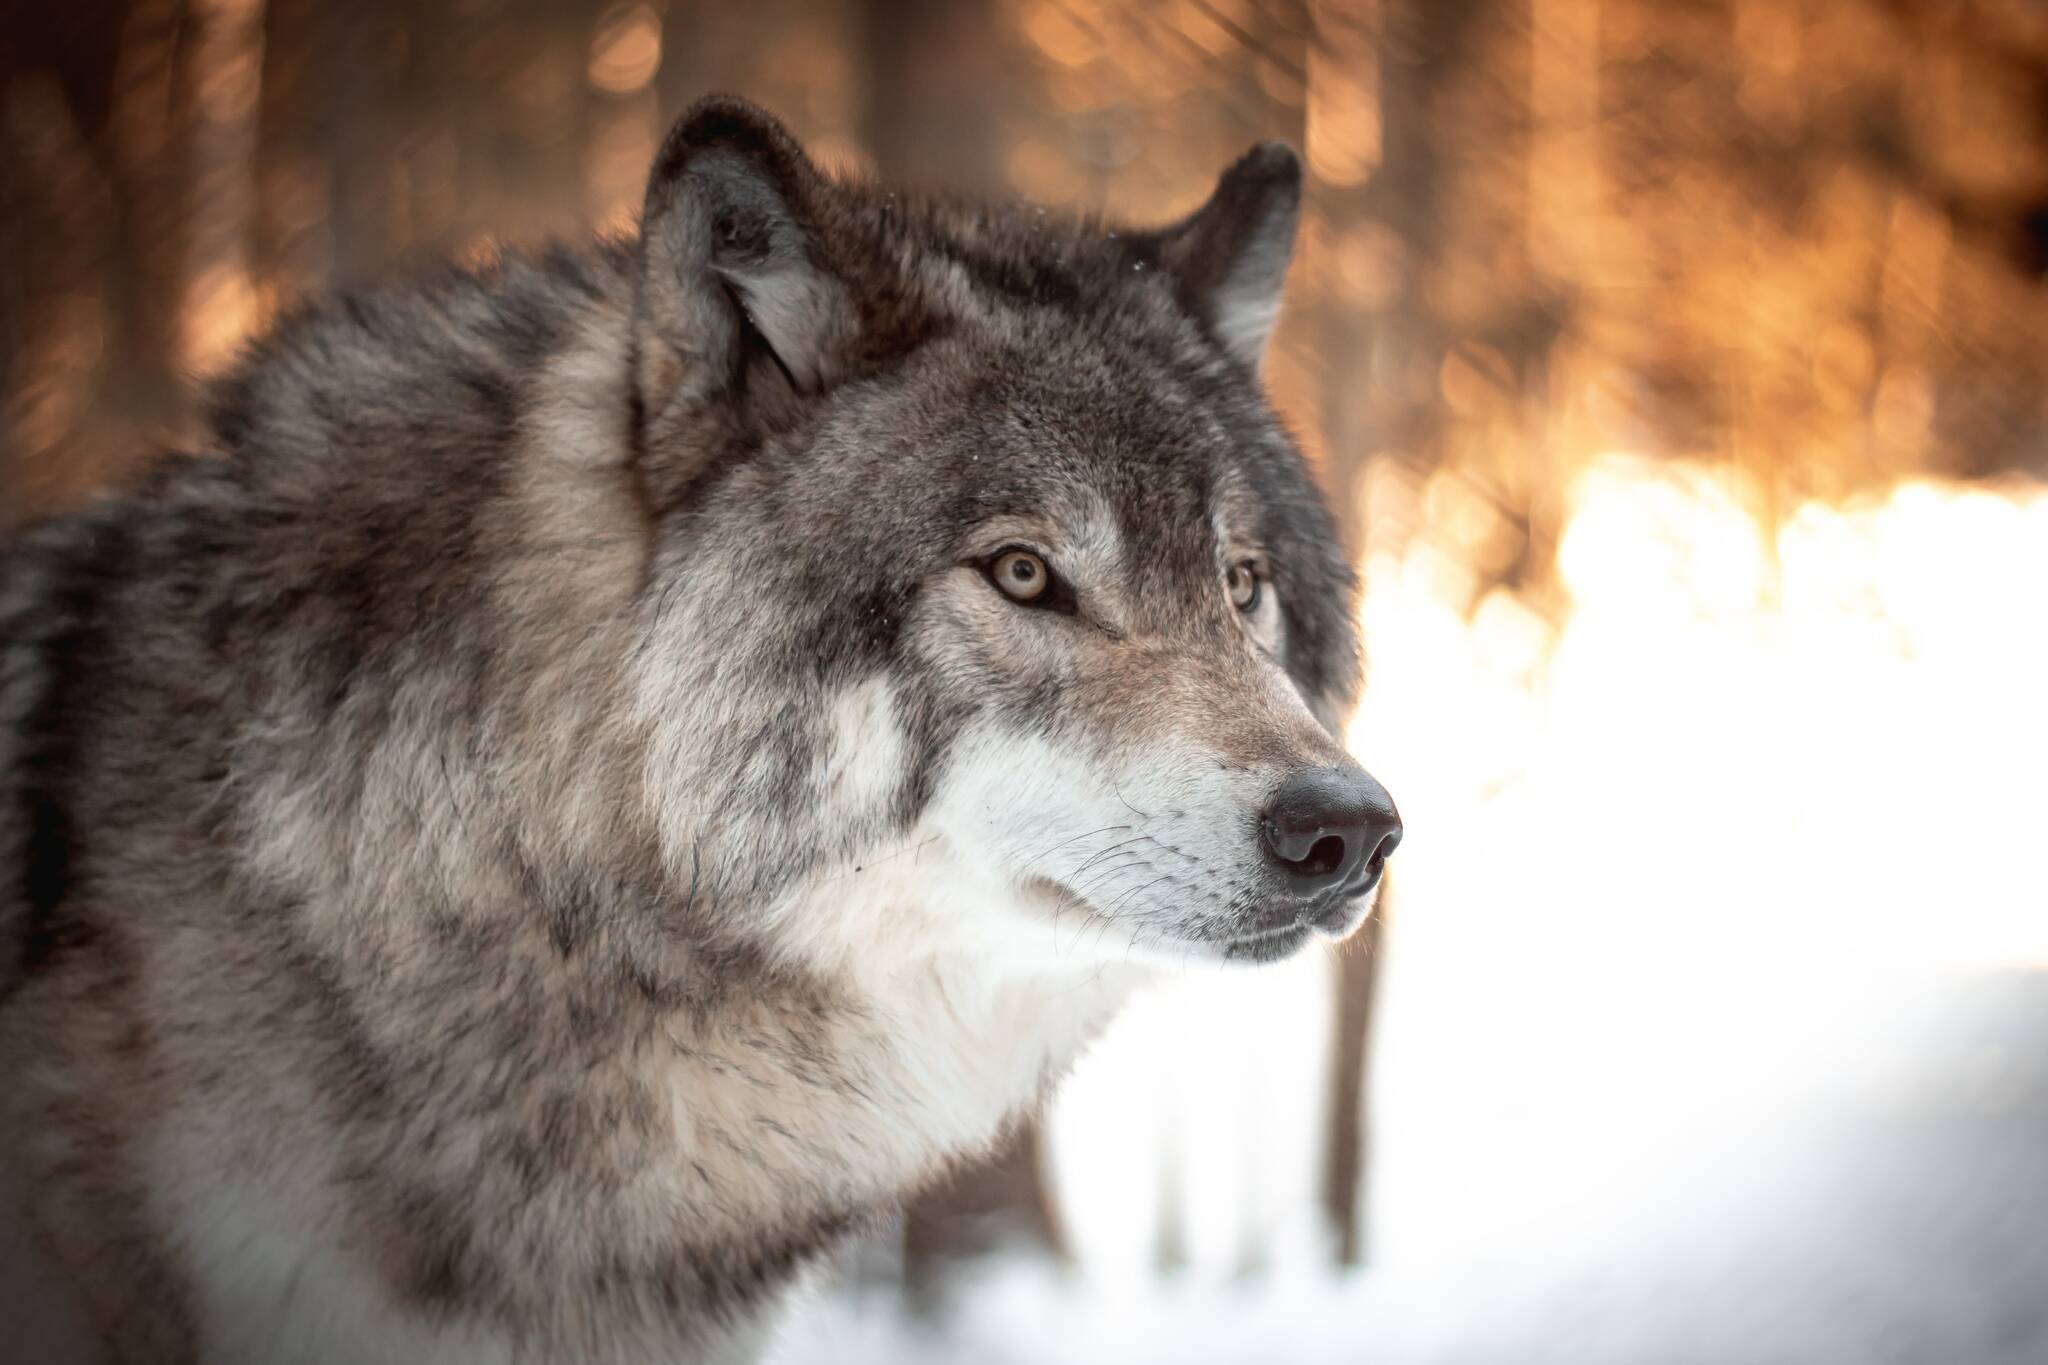 There have been reports of wolves, like the one shown in this public domain image, near the Mendenhall River Community School in early June, but the Alaska Department of Fish and Game hasn’t received any reports of wolves being a nuisance, said a state biologist. (Milo Weiler / Unsplash)